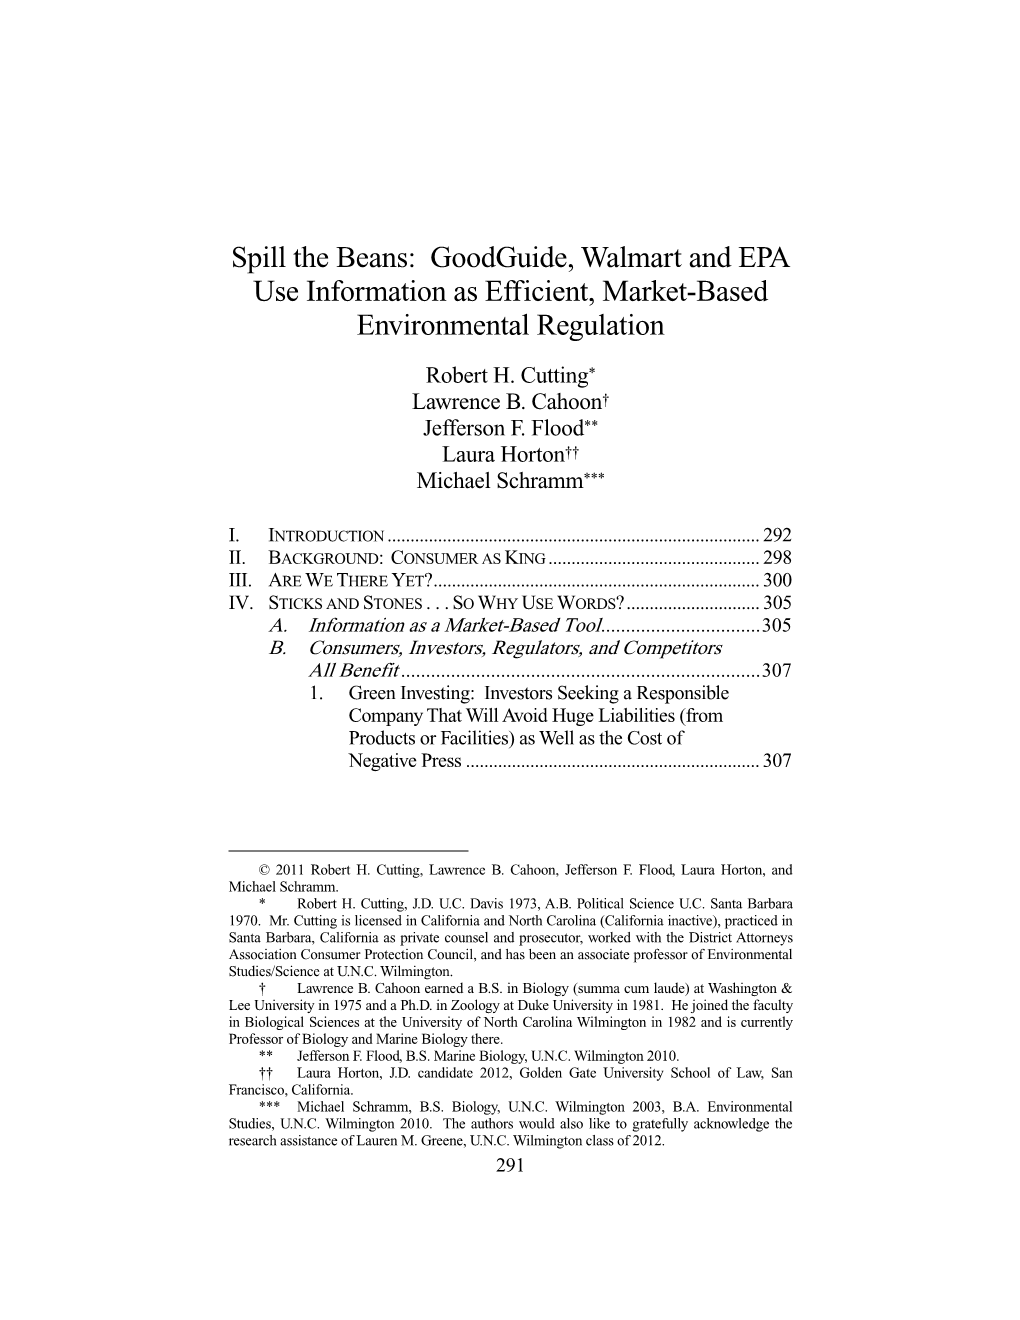 Spill the Beans: Goodguide, Walmart and EPA Use Information As Efficient, Market-Based Environmental Regulation